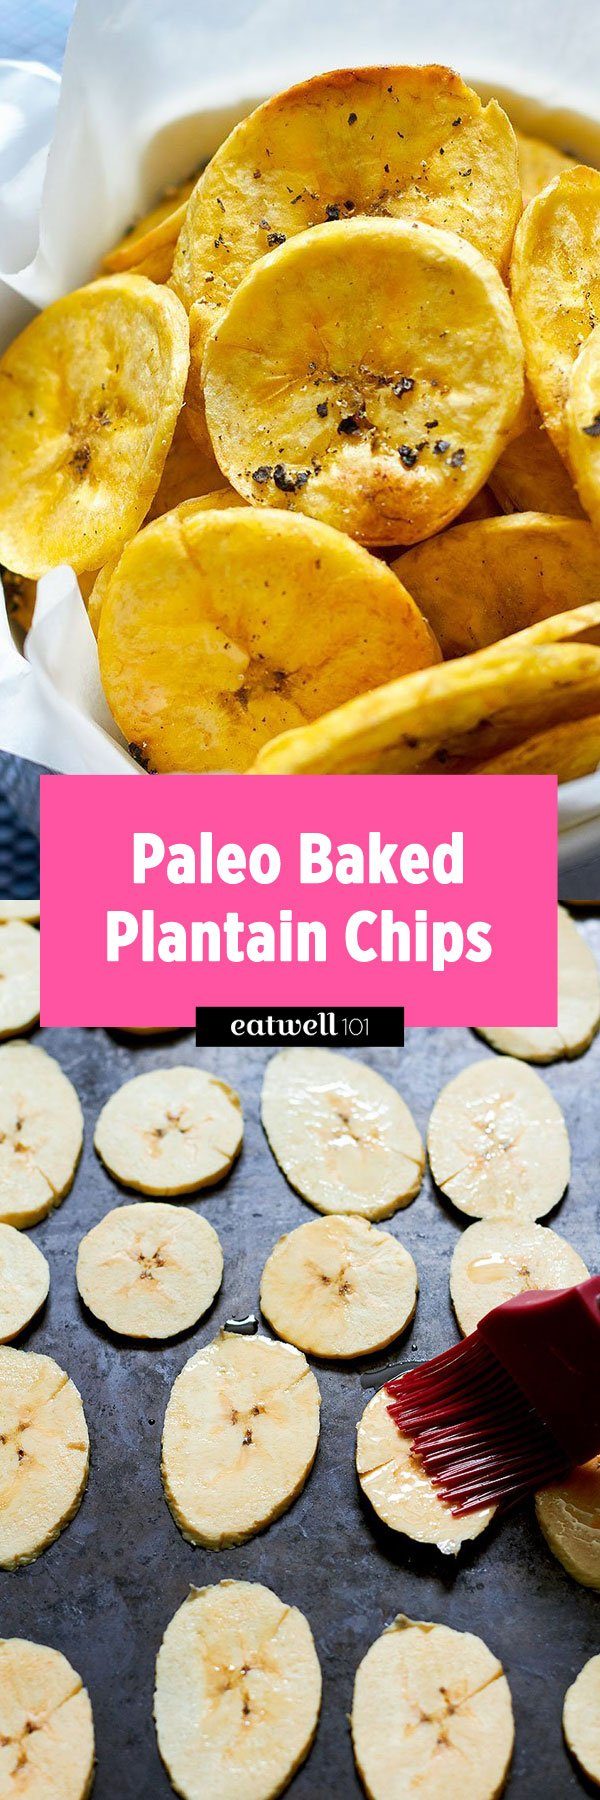 Baked Plantain Chips - #plantain #banana #snack #recipe #eatwell101 - A healthy crunchy option that makes you snack right.